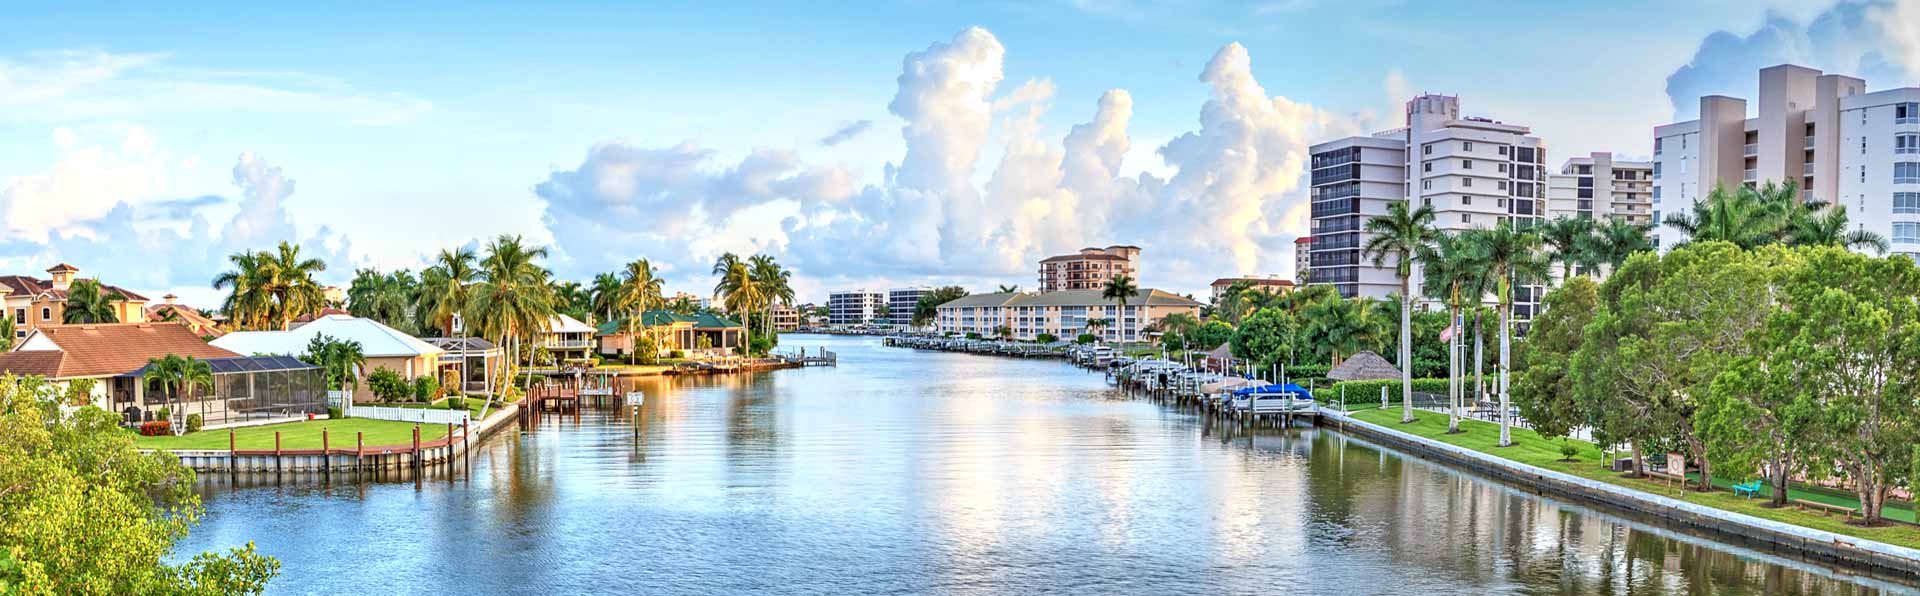 Florida waterway lined with homes and condos